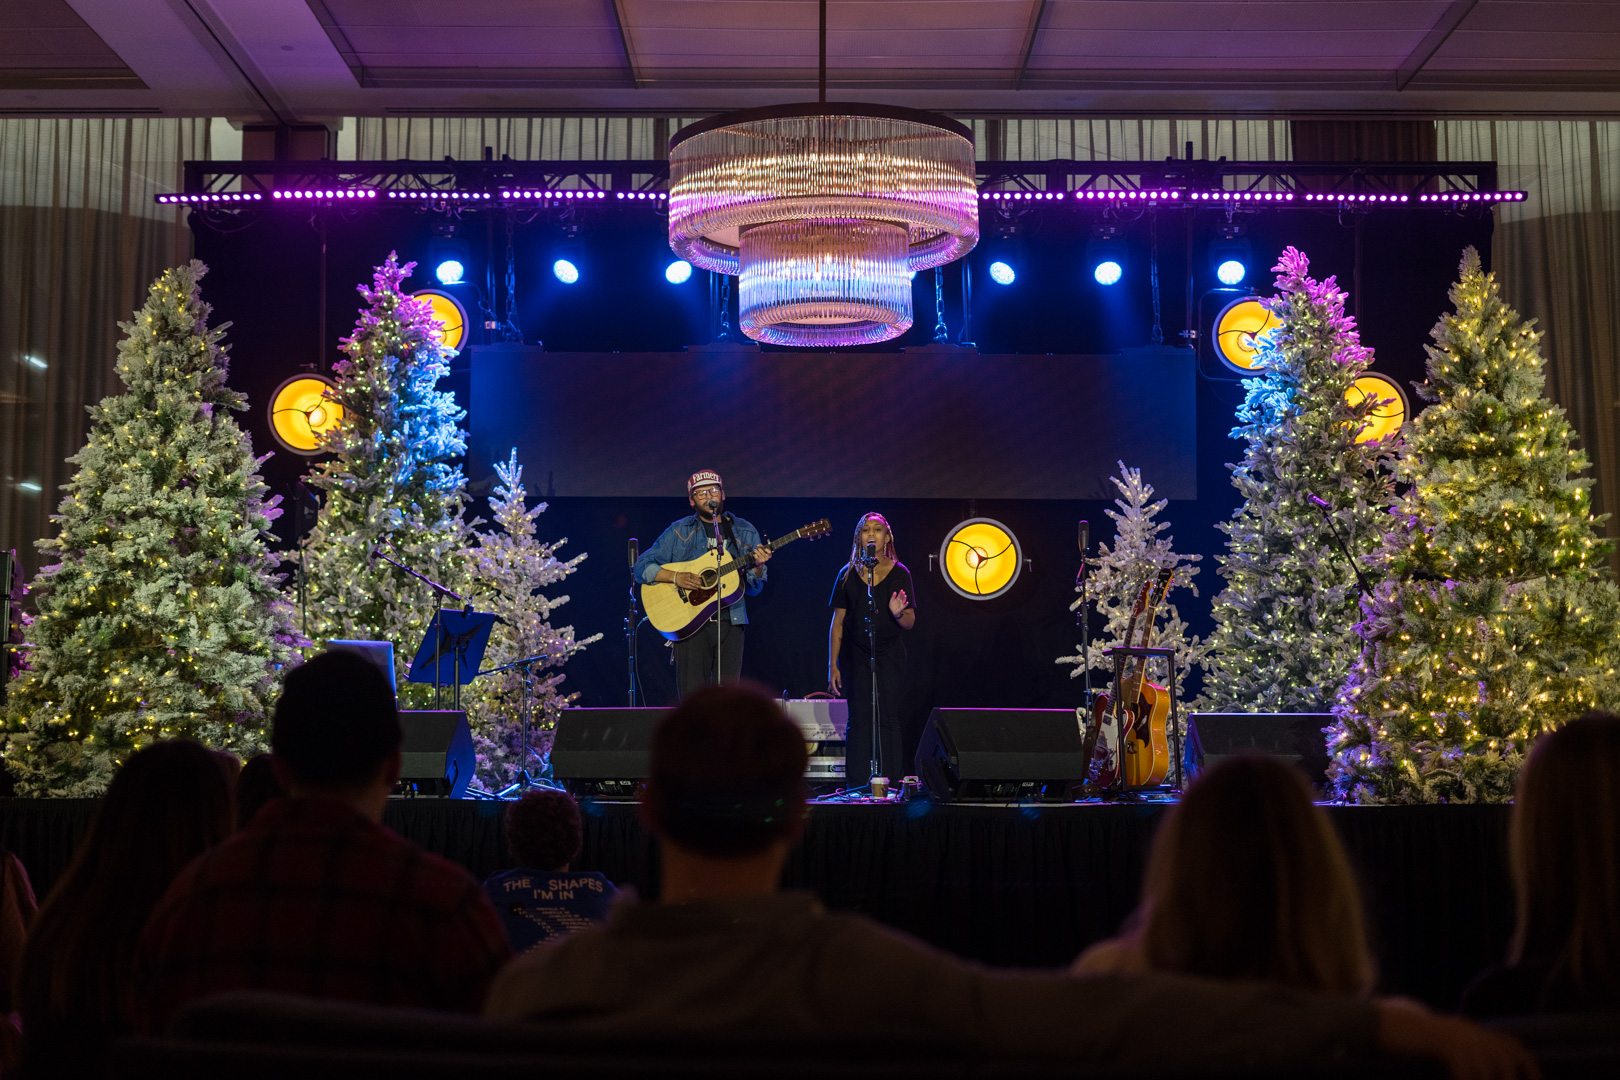 A man plays guitar while singing, a young woman duets with him standing on a stage with large Christmas trees on both sides. 